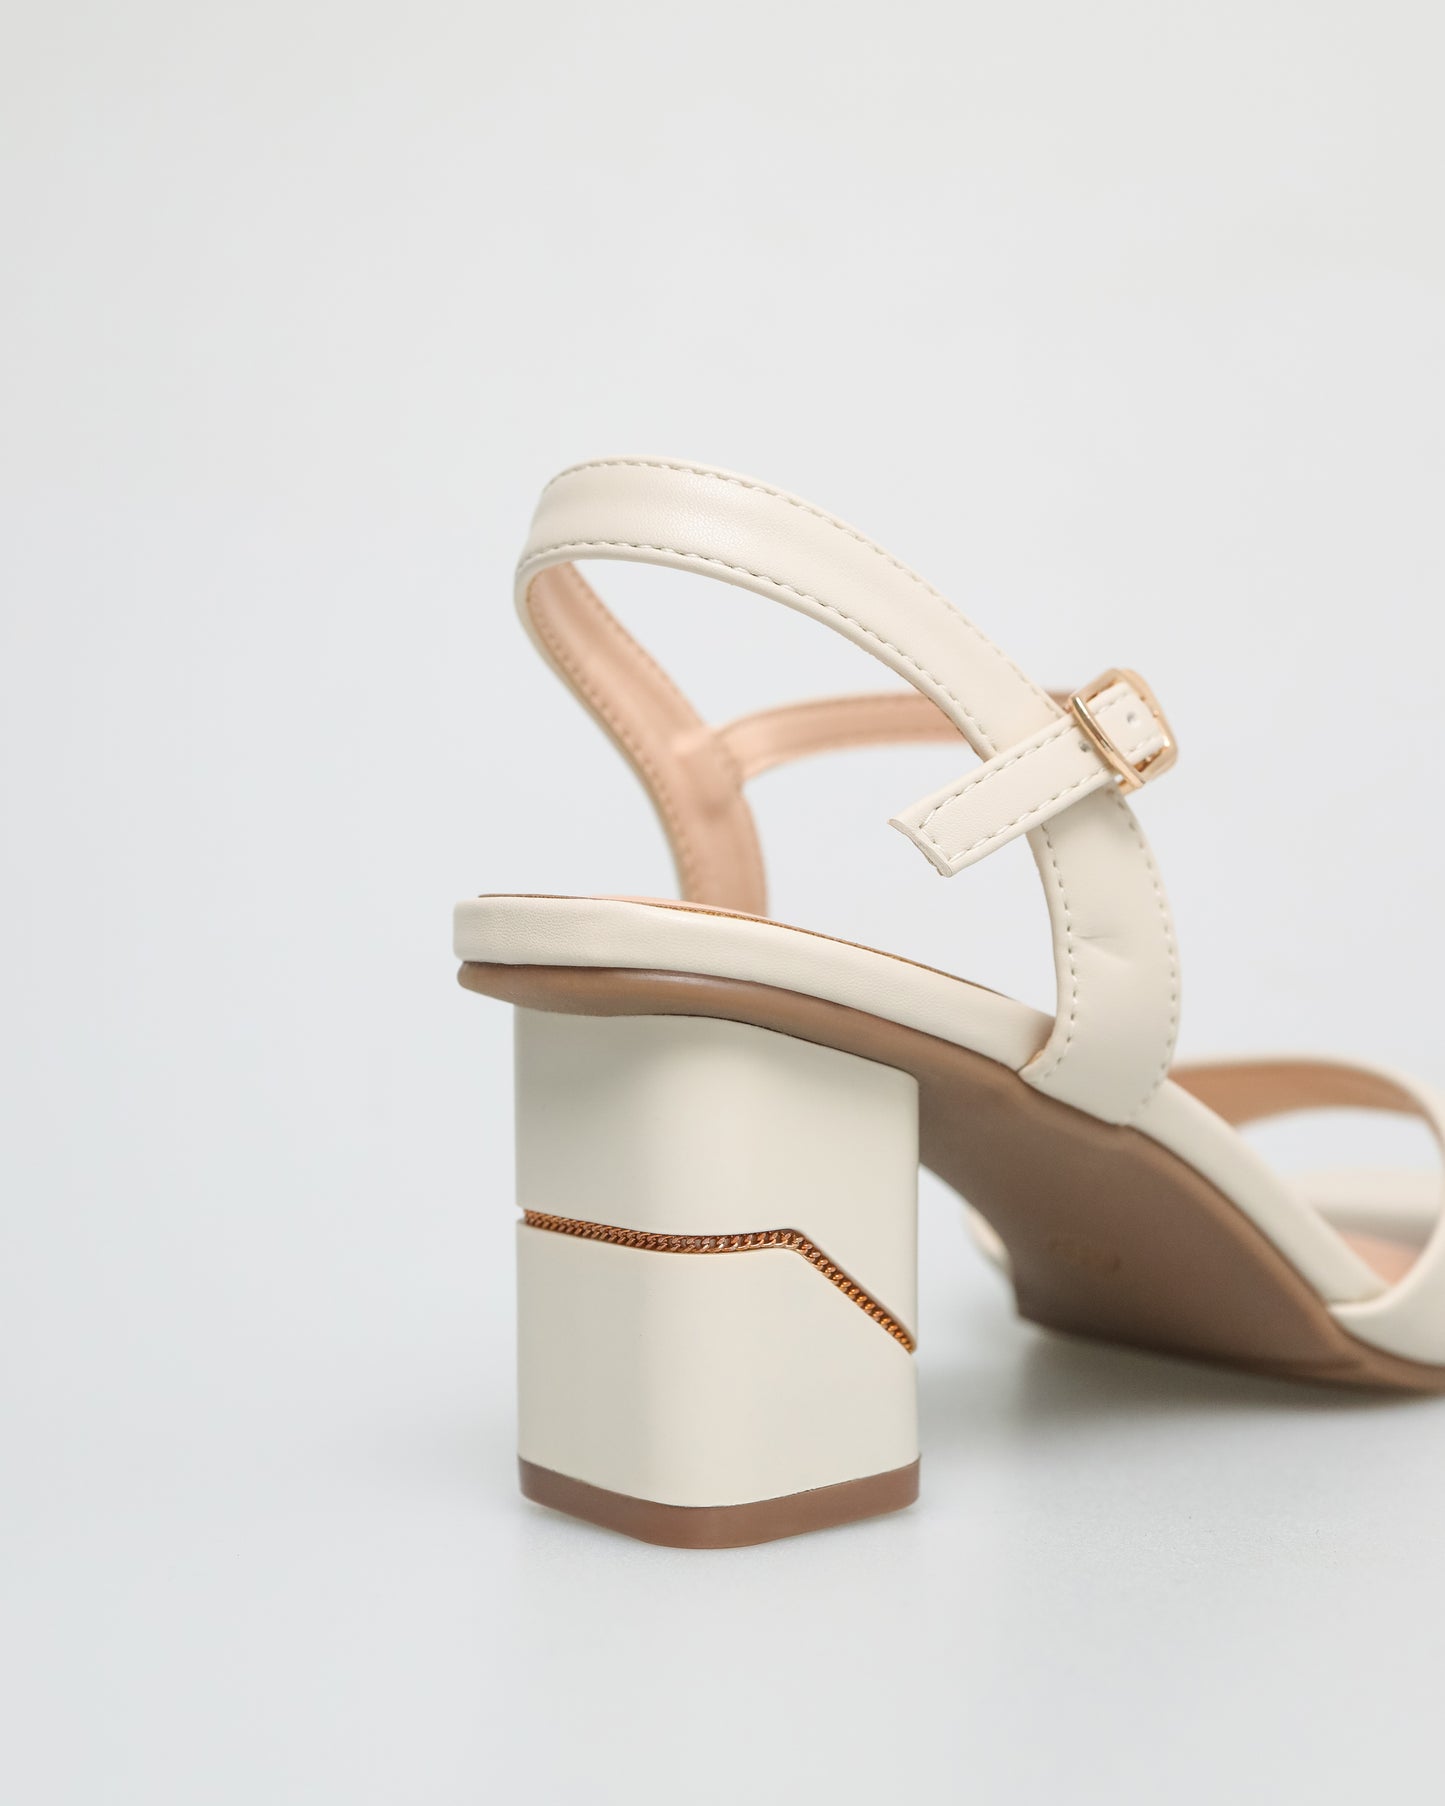 Tomaz NN267 Ladies Open Toe with Strap Chained-Block Heels (Cream)